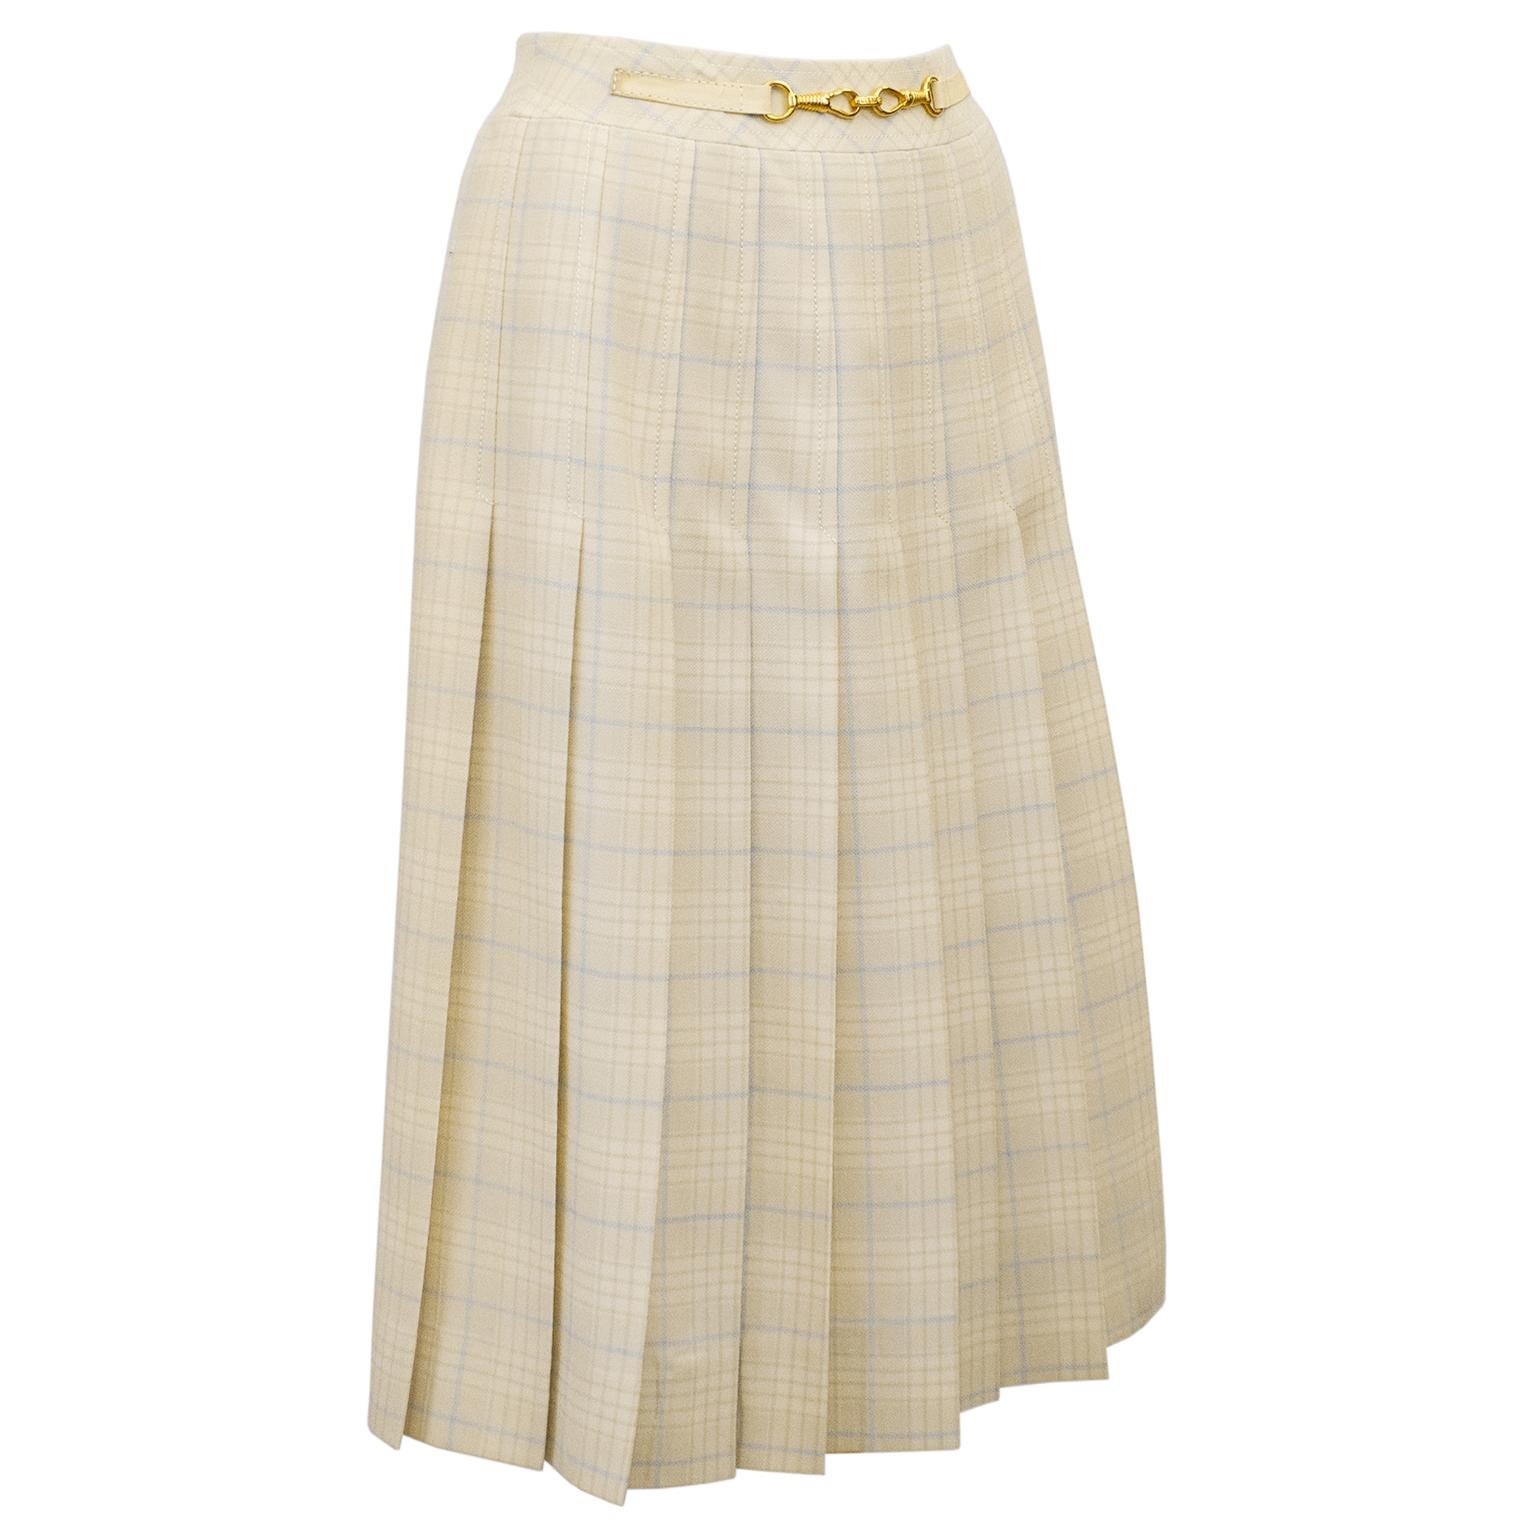 1970's classic Celine cream and pale blue wool tartan pleated skirt with half cream leather and gold belt at waistband. Inverted stitched pleats on the front and back. Overall A line shape. In excellent condition, side zipper with hook and eye. Fits